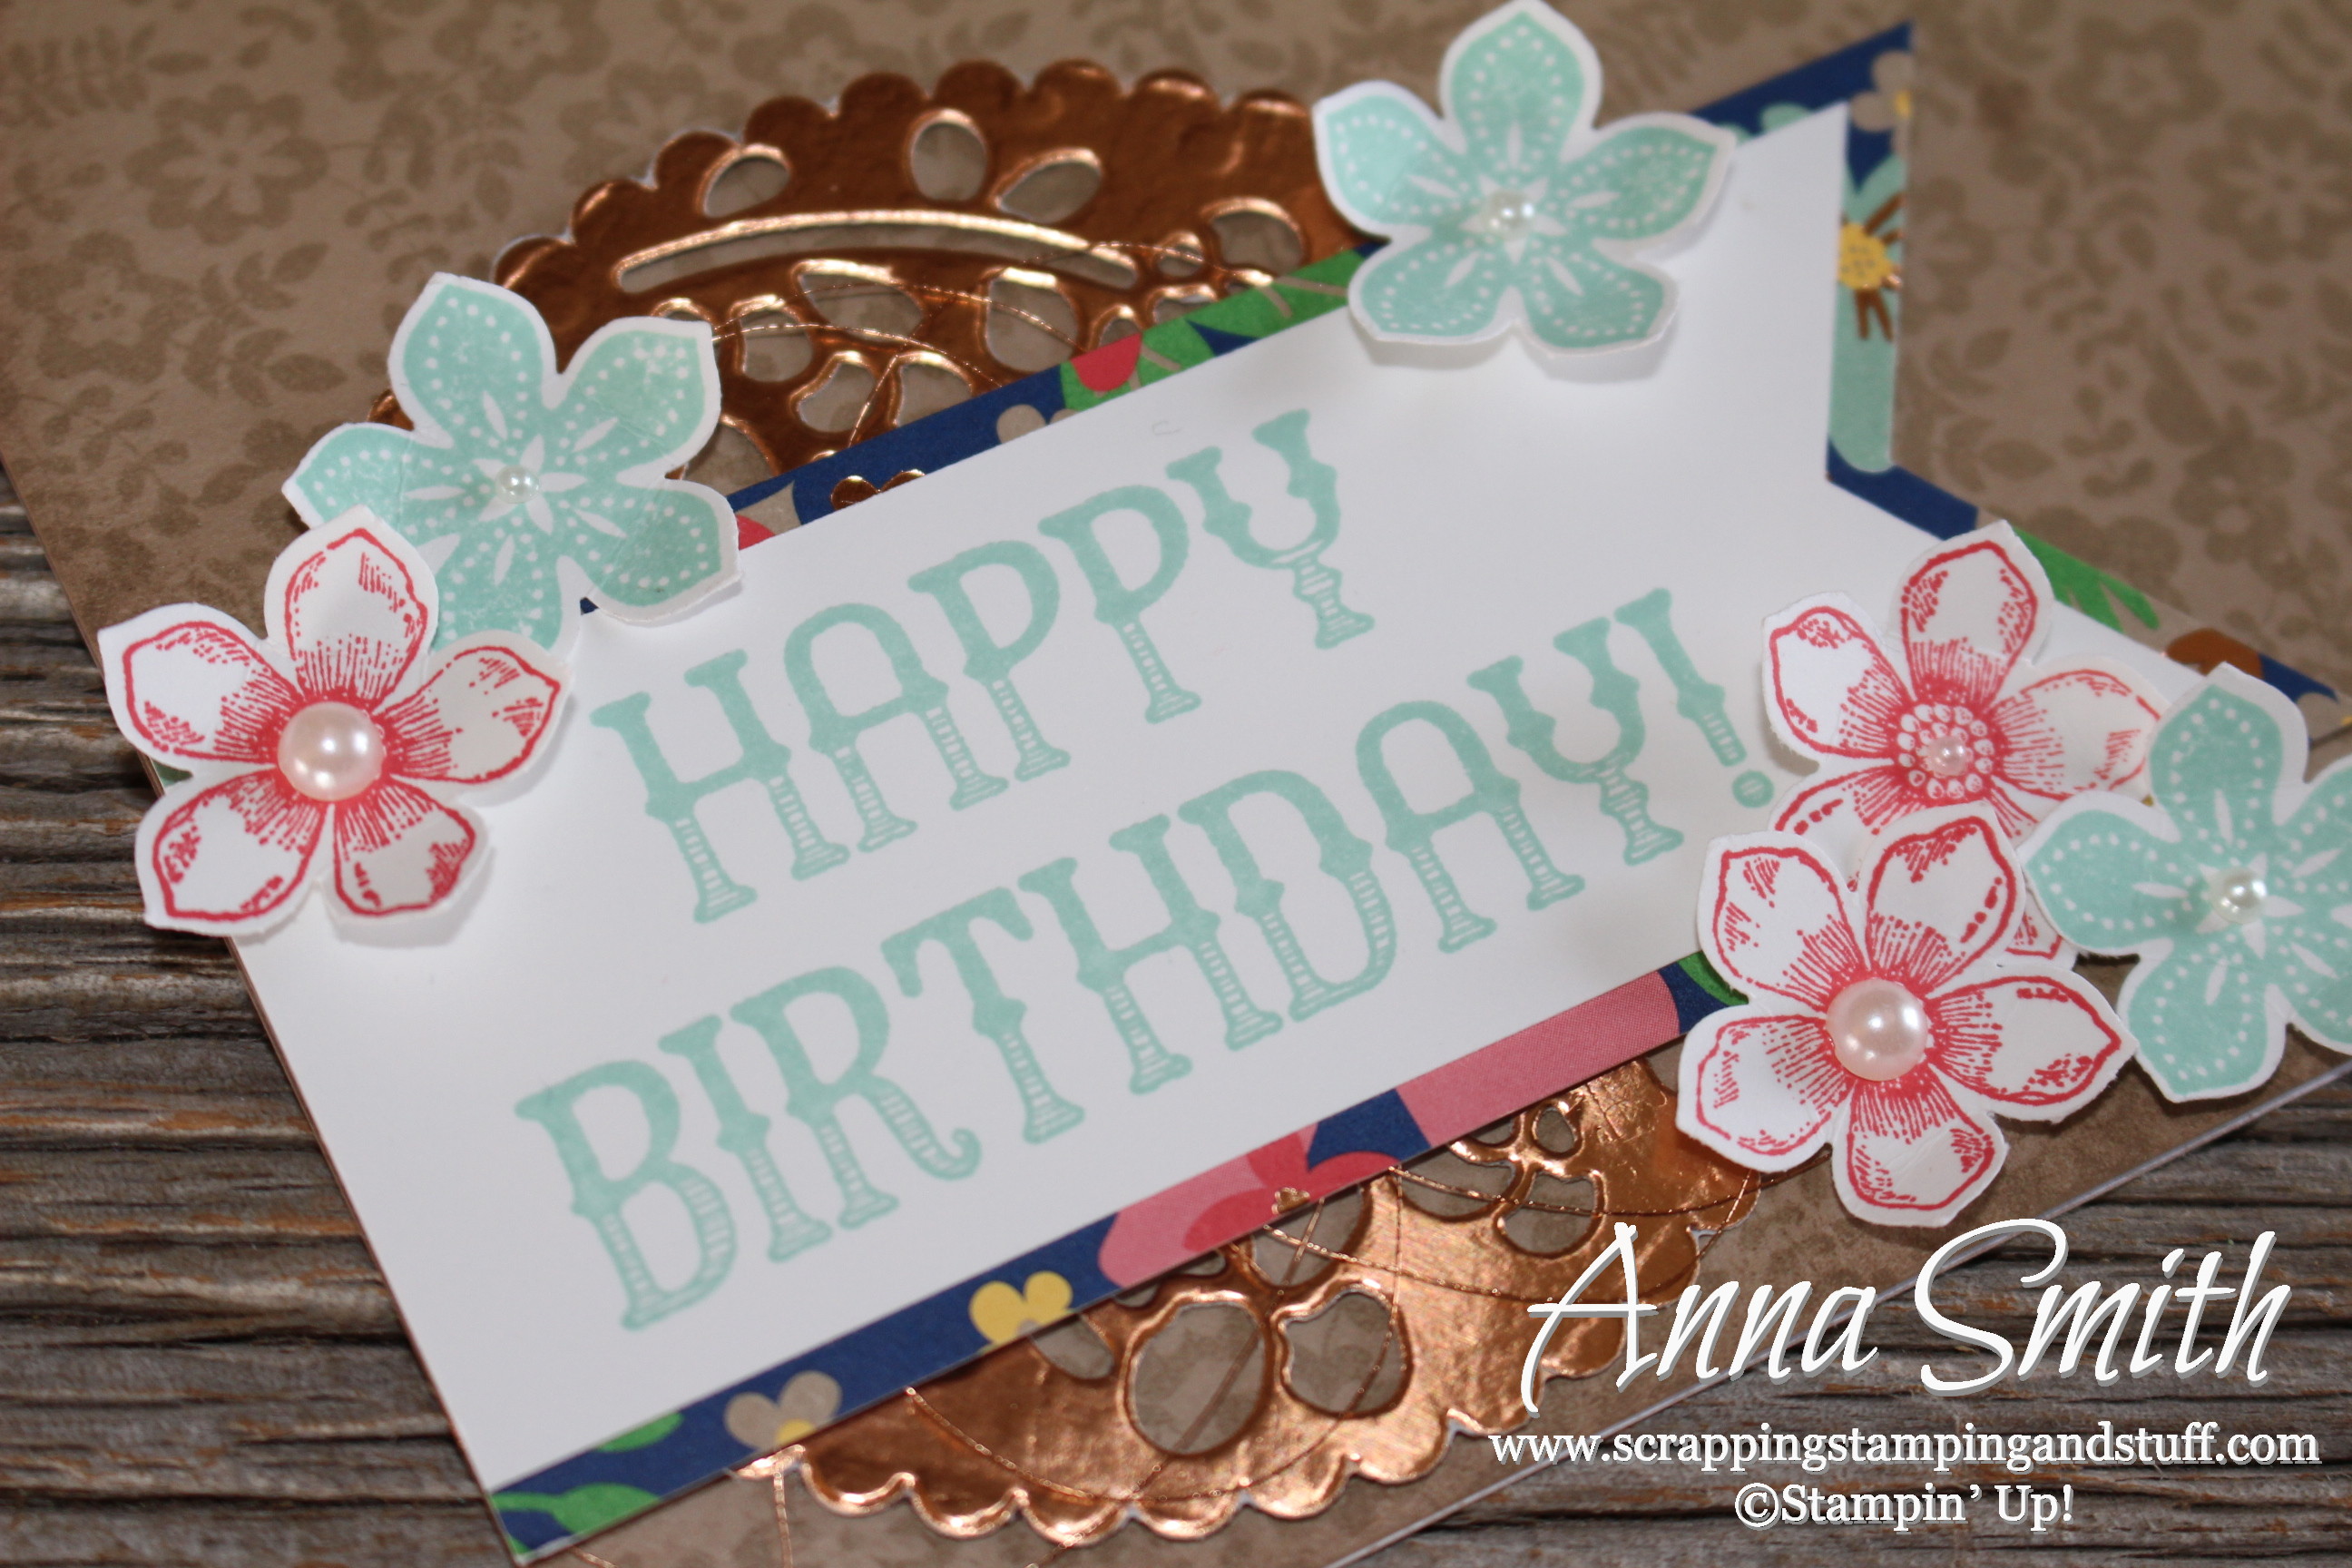 A Stampin’ Up! Window Shopping Birthday Card